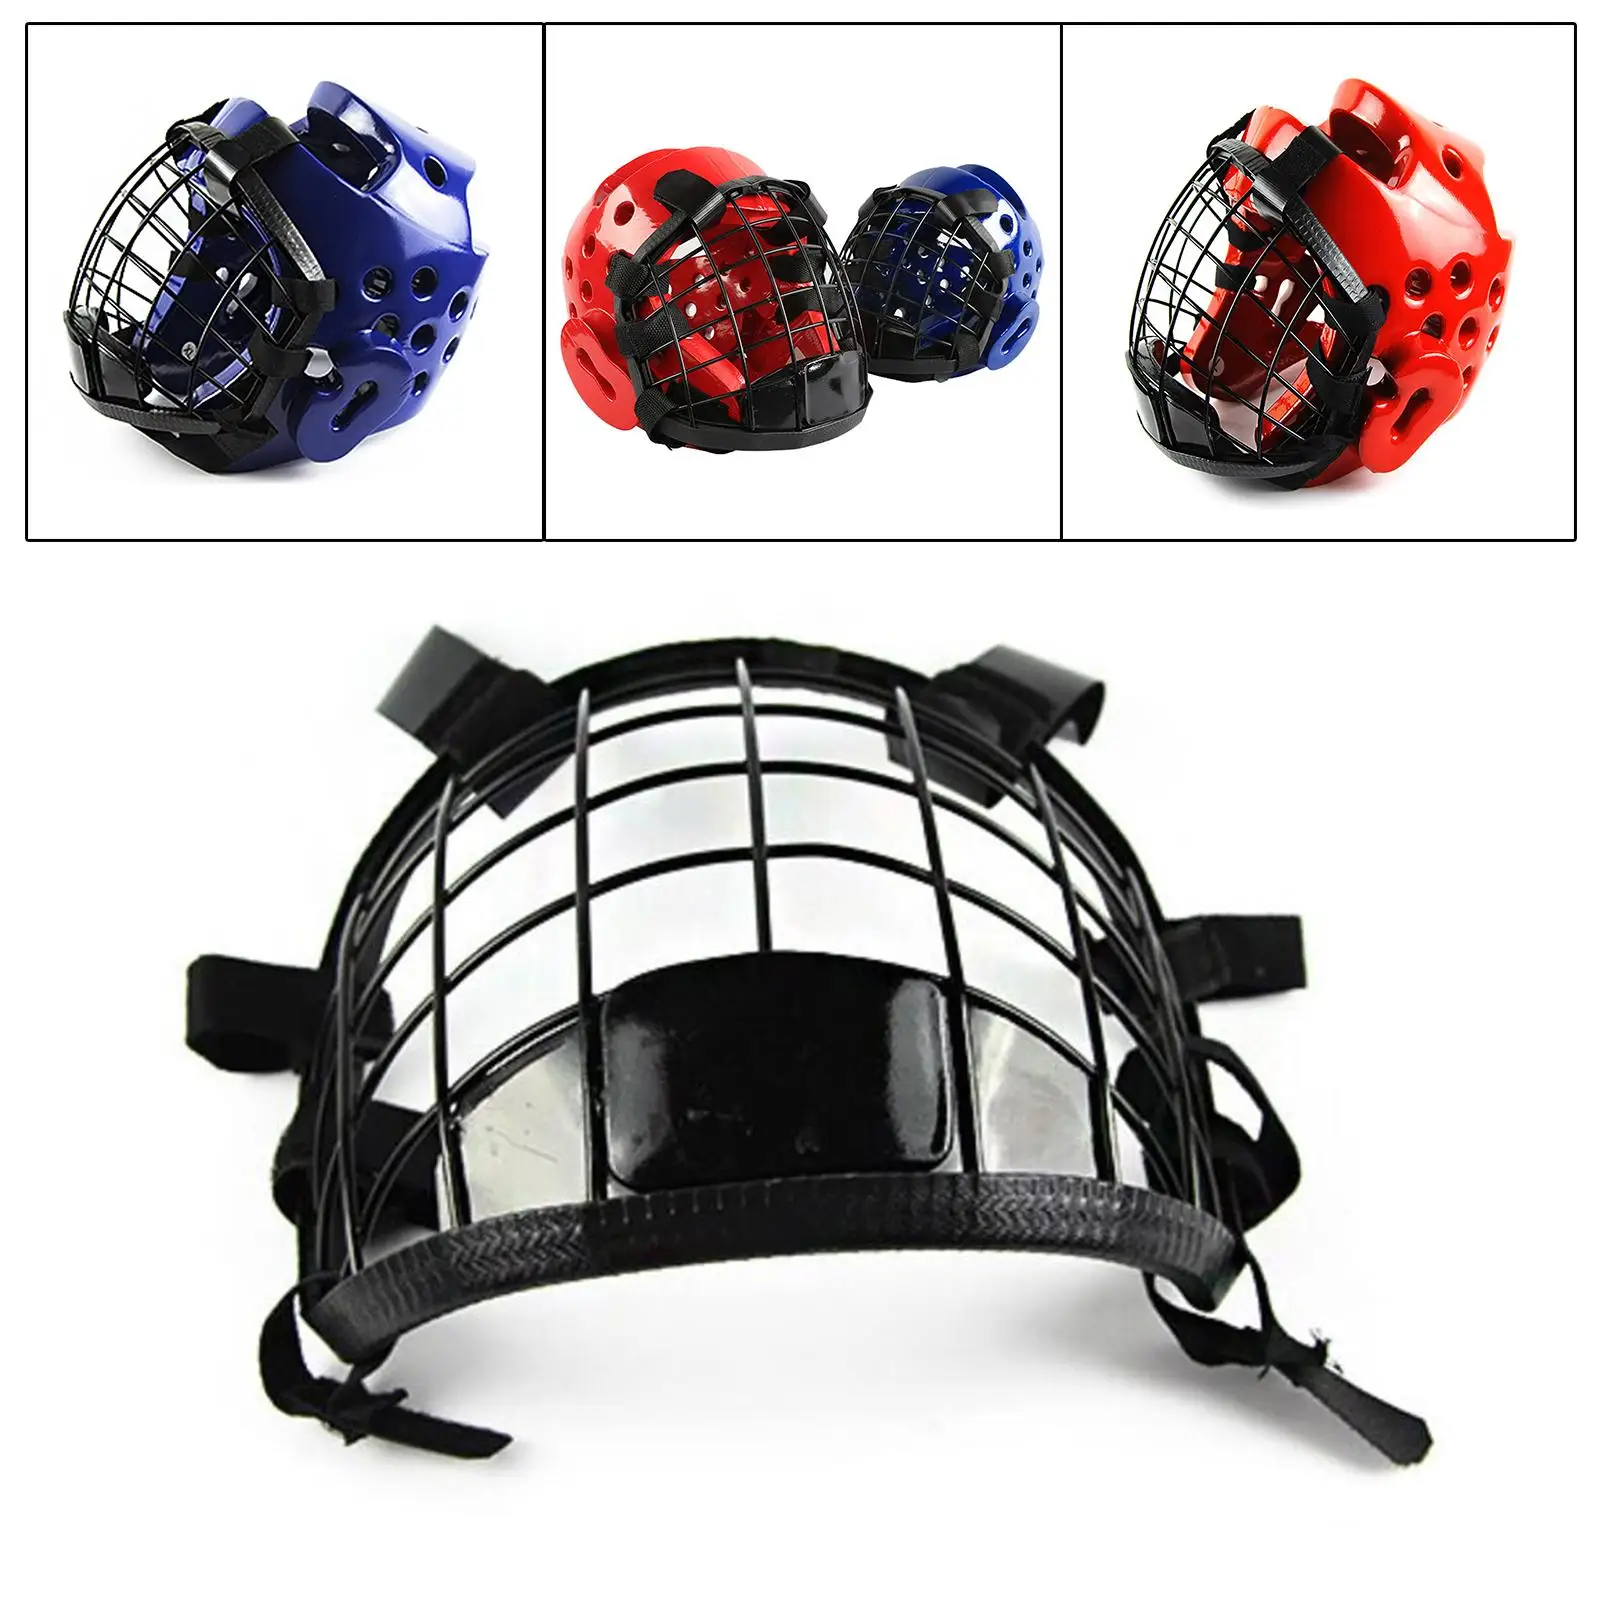 Metal Taekwondo Guard Child Removable Face Protection Protective Head Cover for Martial Arts Boxing Kickboxing Grappling Karate